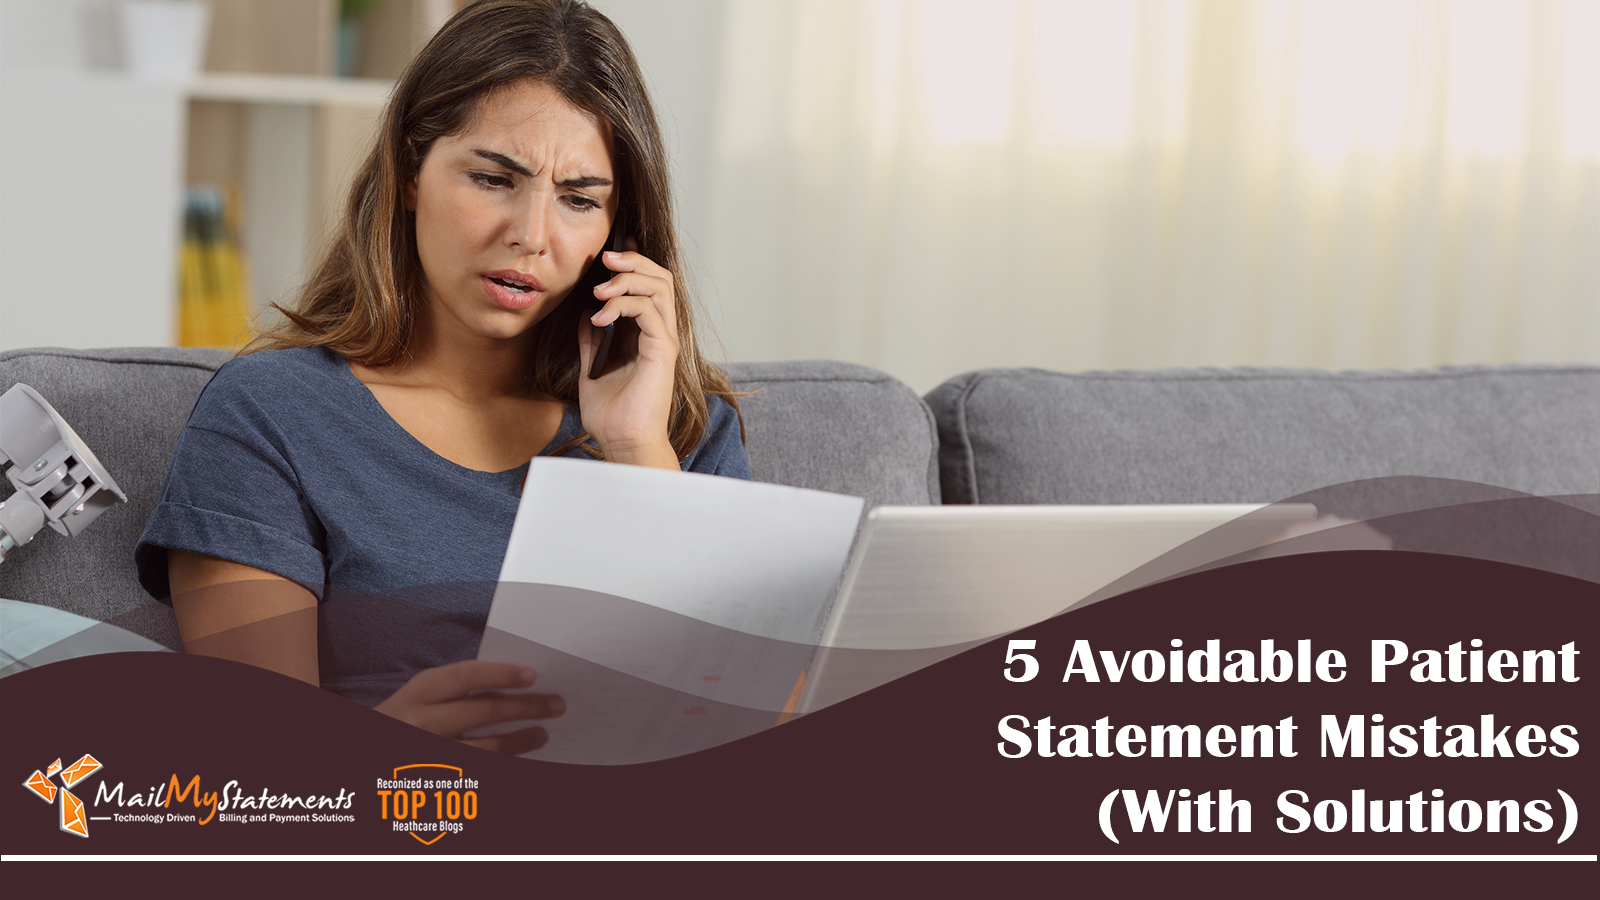 5 Avoidable Patient Statement Mistakes (With Solutions)